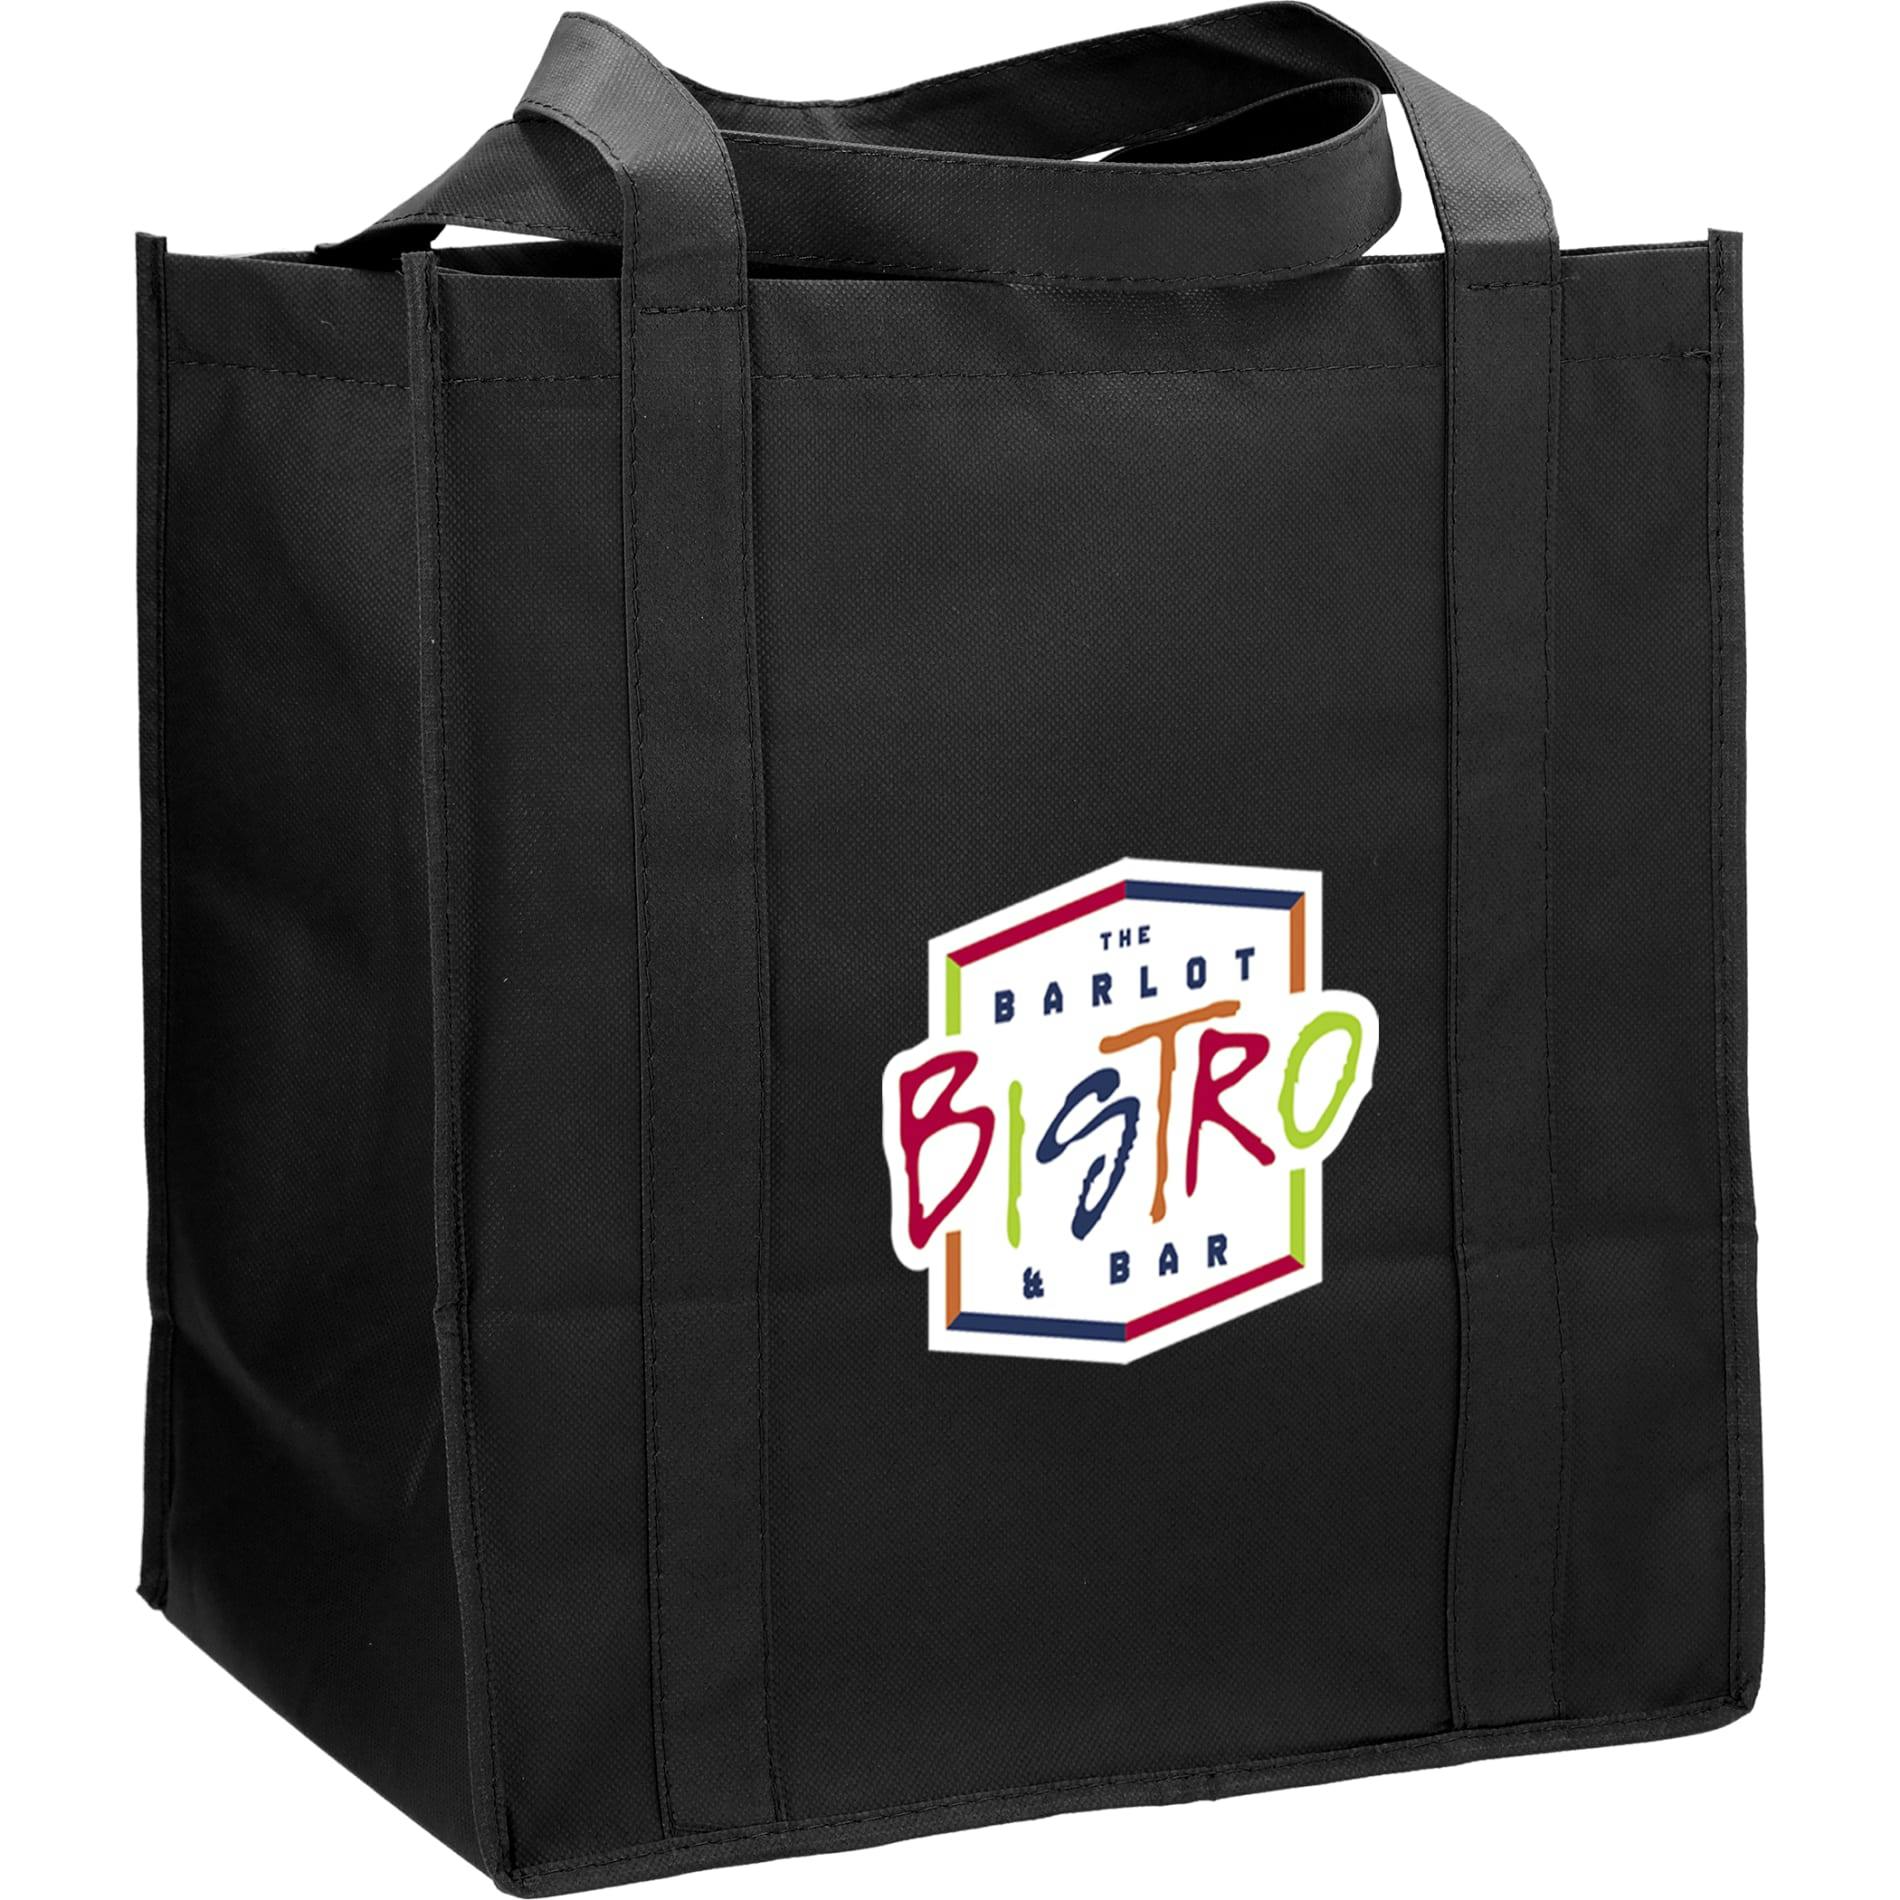 Hercules Non-Woven Grocery Tote - additional Image 1